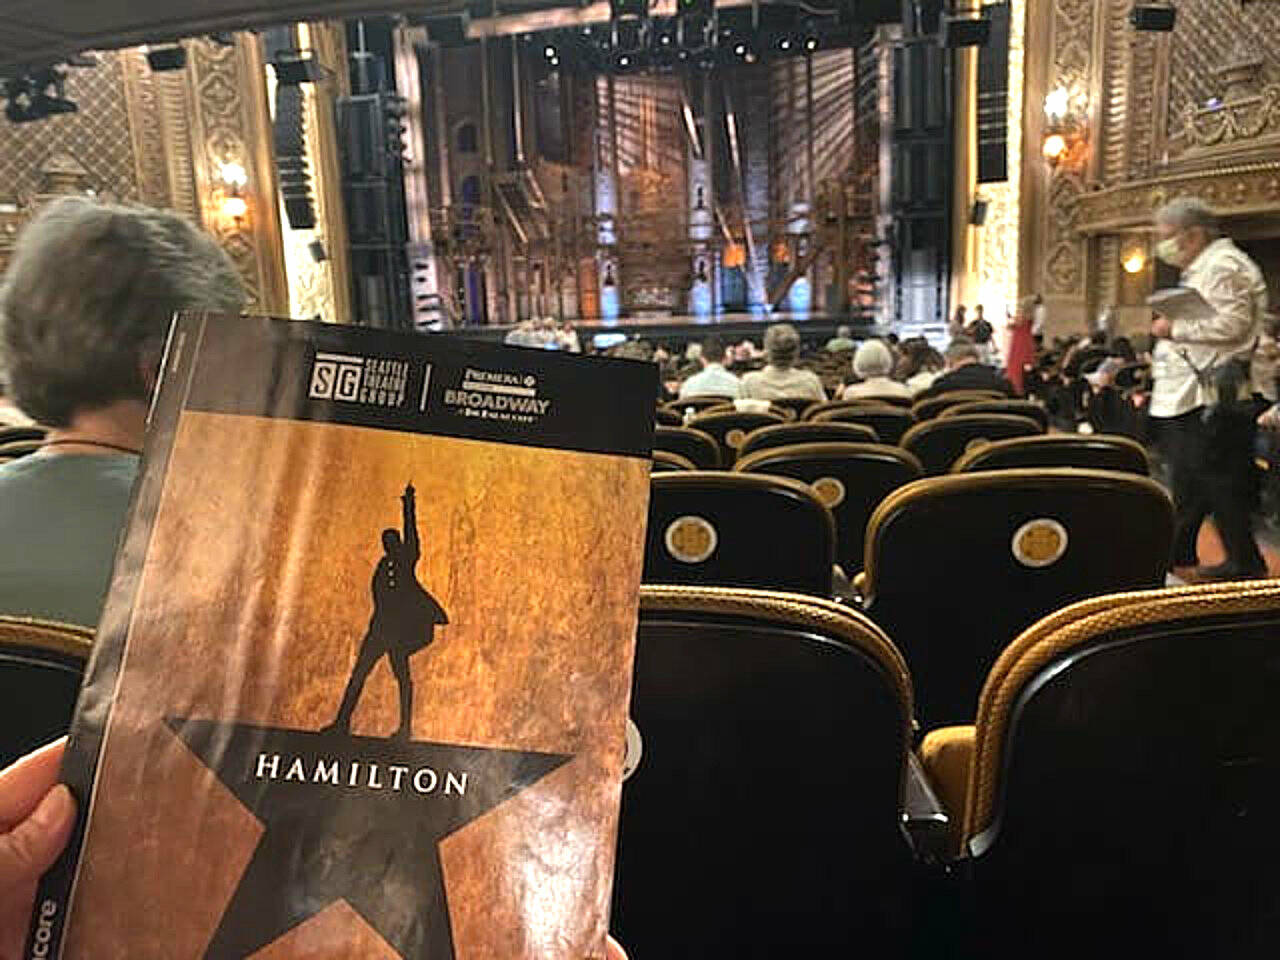 When “Hamilton” came to The Paramount Theatre, the Girl Scouts came, too. (Jennifer Bardsley)